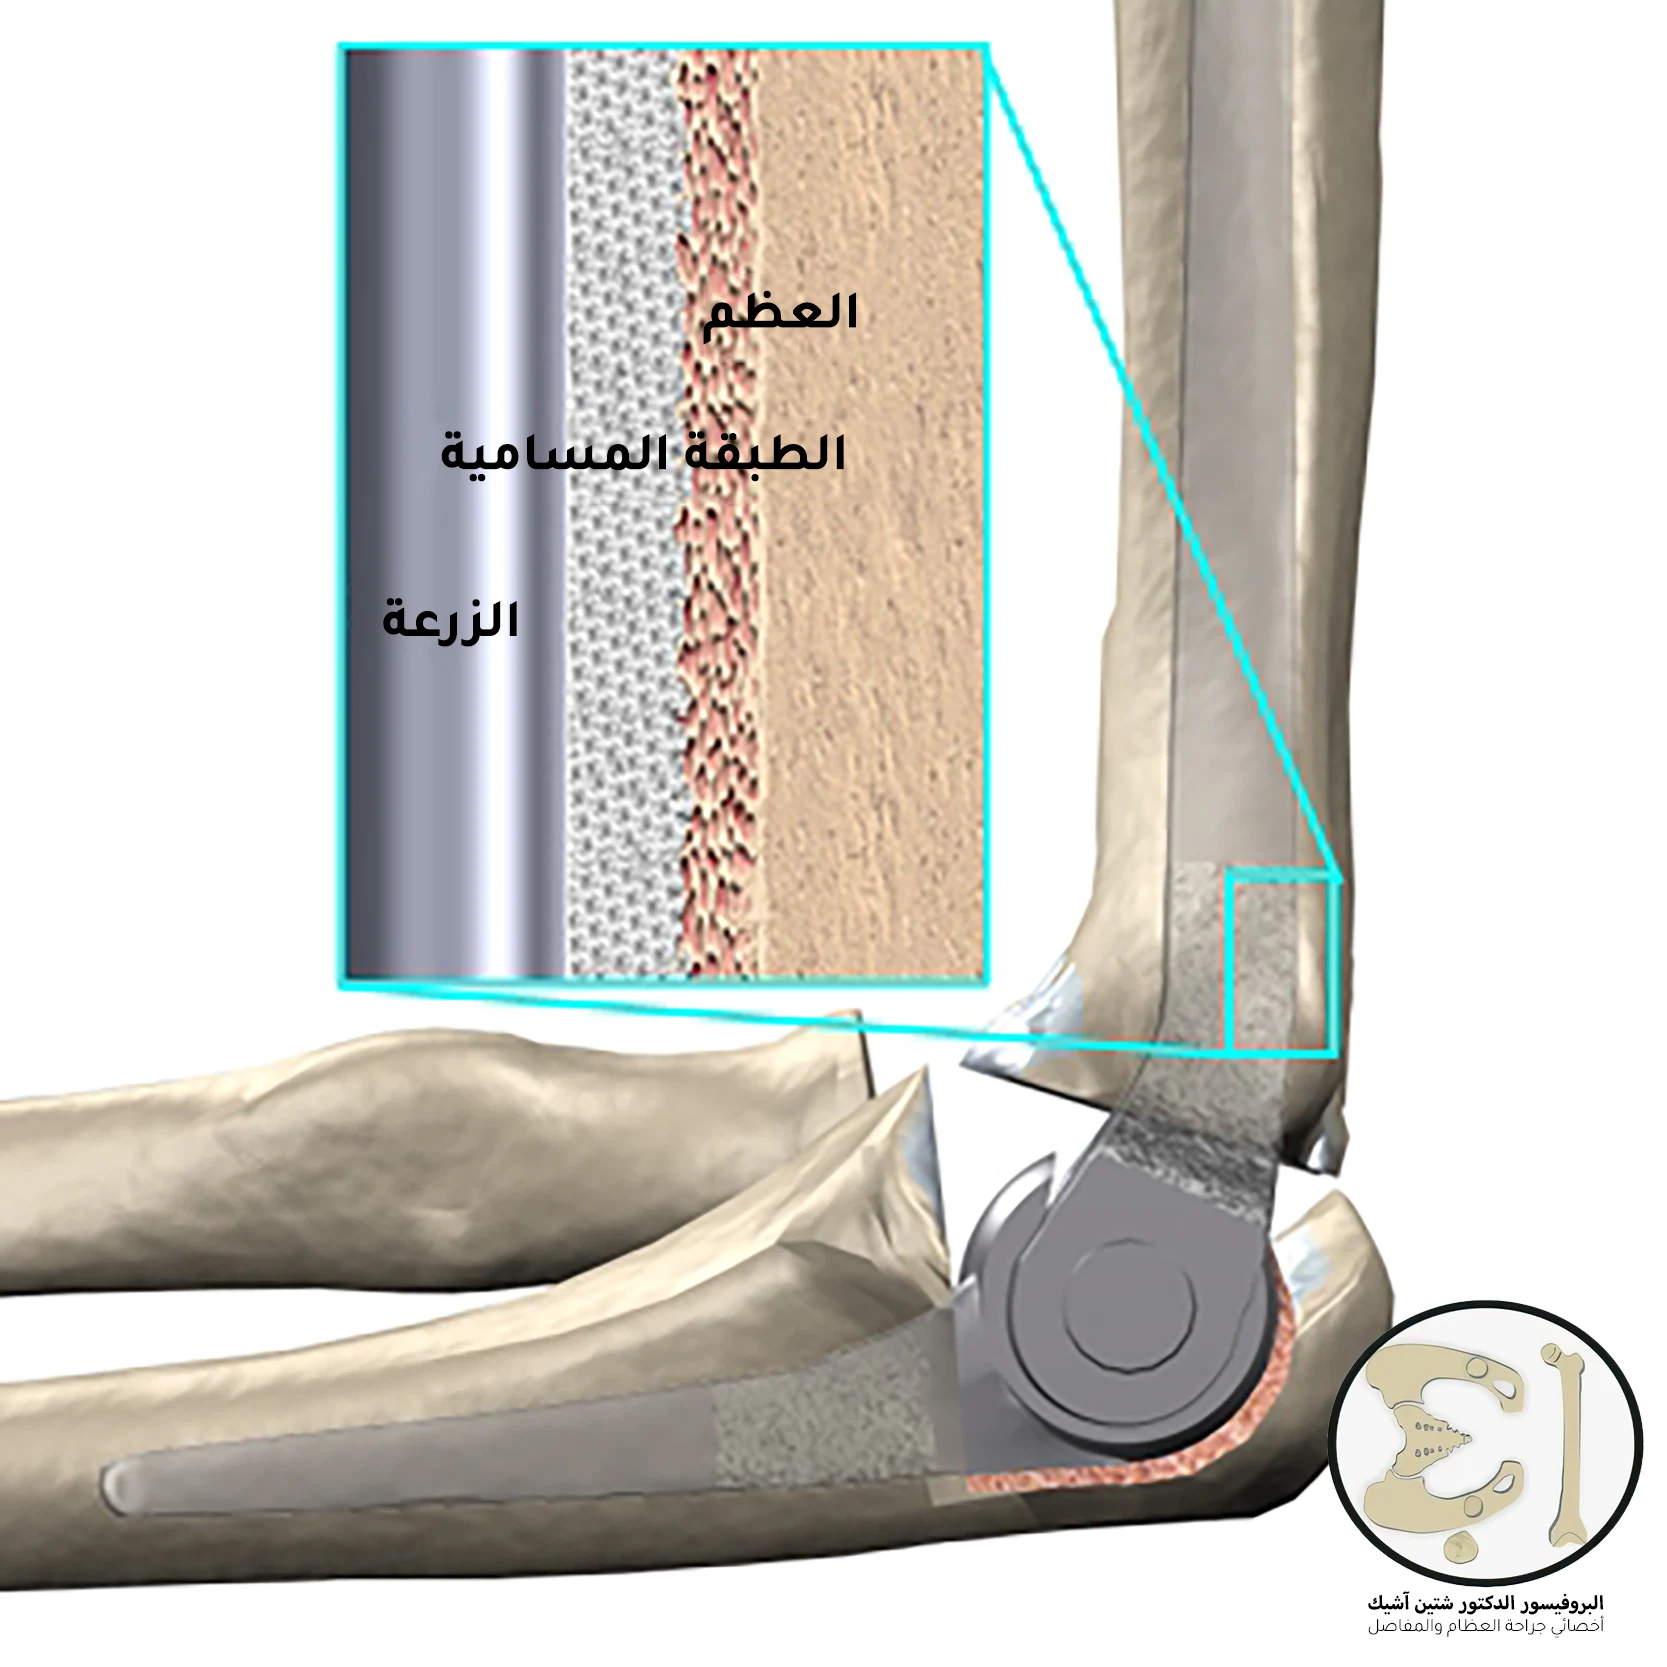 A picture showing the placement of the artificial elbow joint